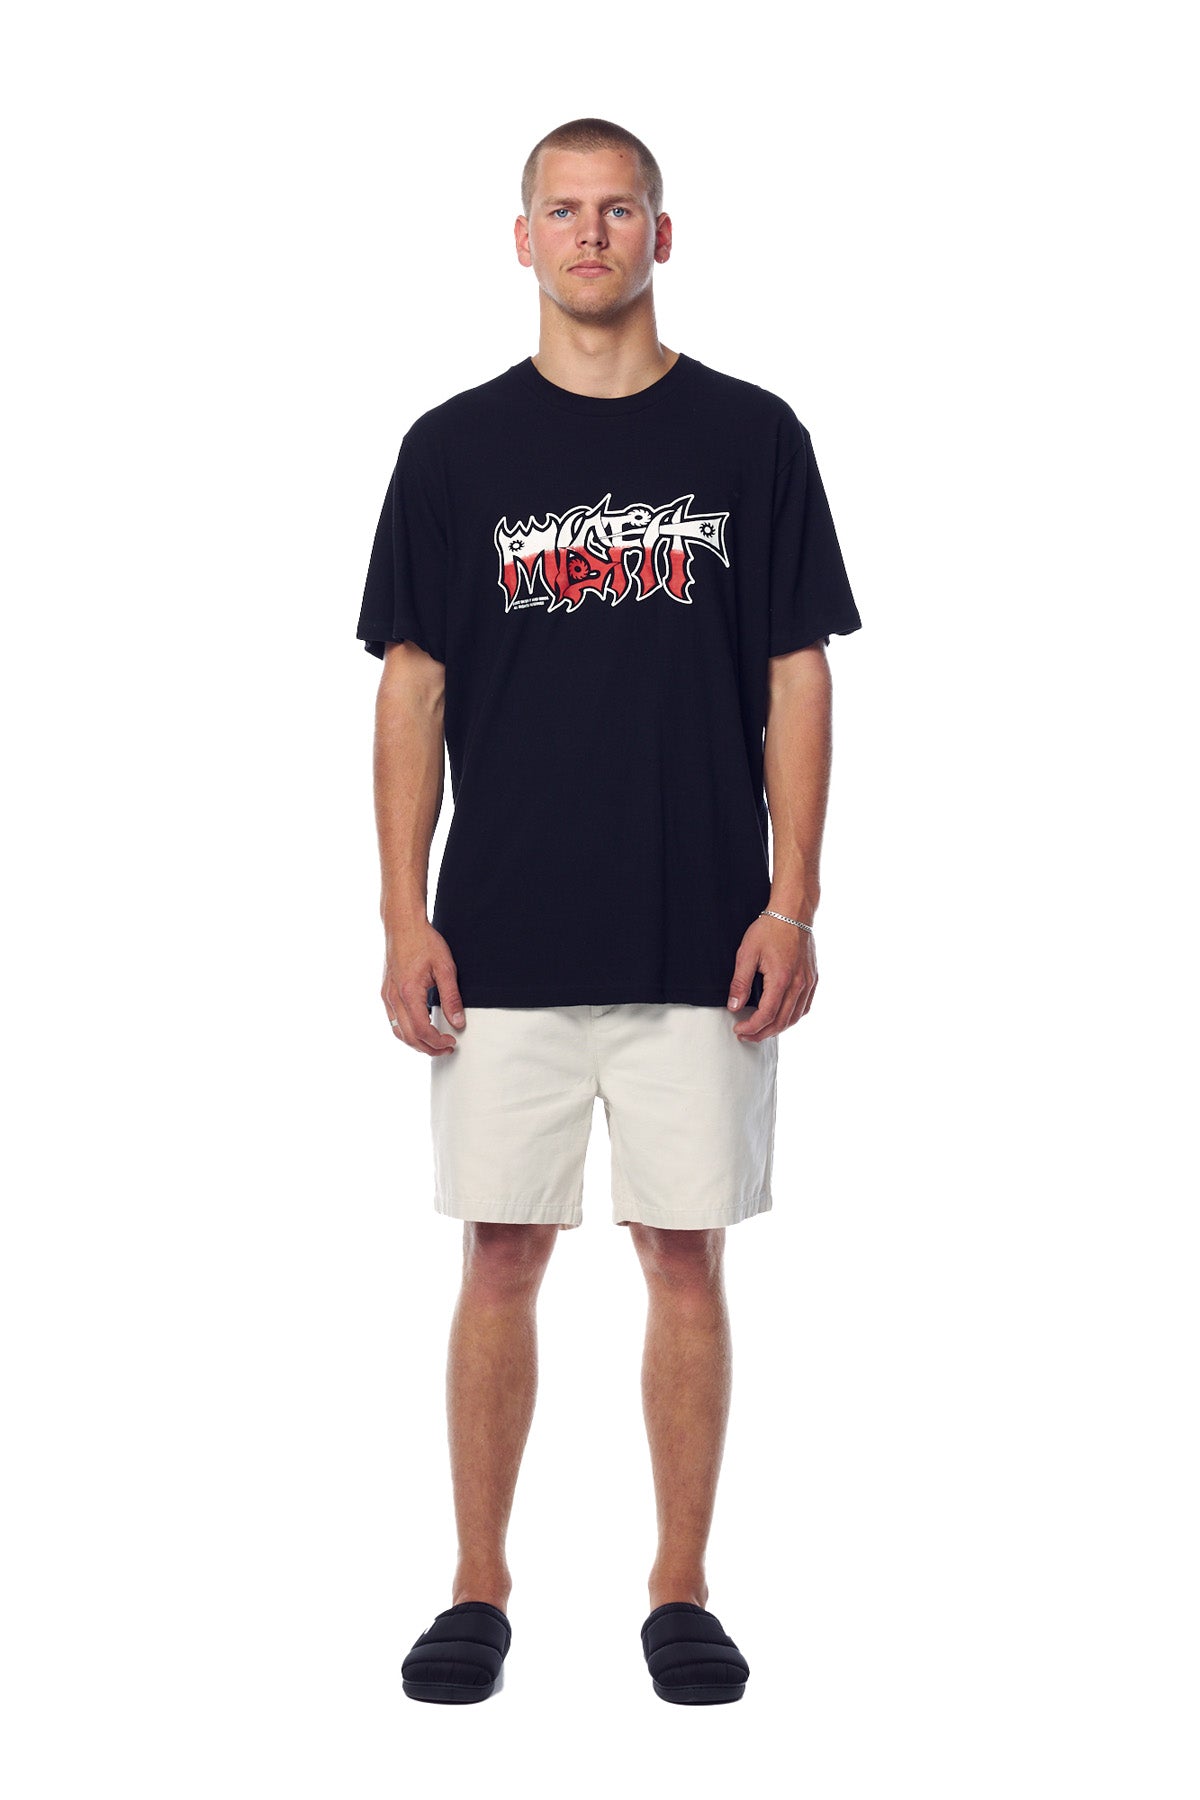 COWBOYS FROM HELP 50/50 SS TEE - Pitch Black